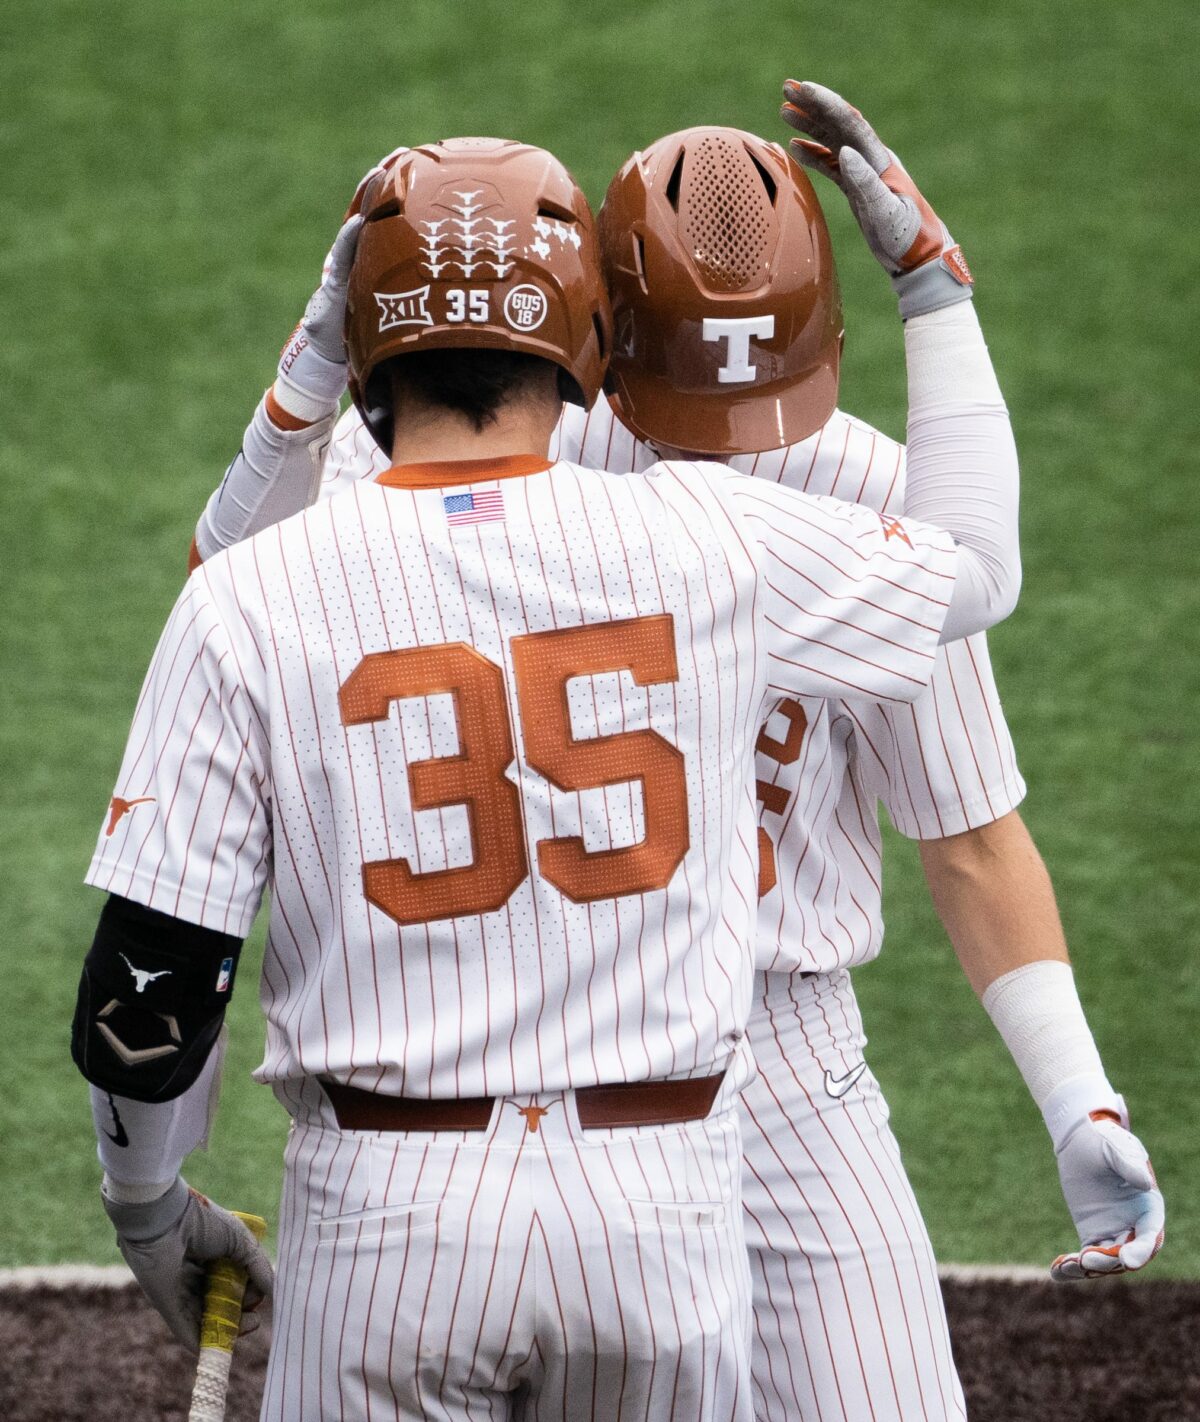 Texas falls to Stanford 7-6 on walk-off fly ball lost in the lights